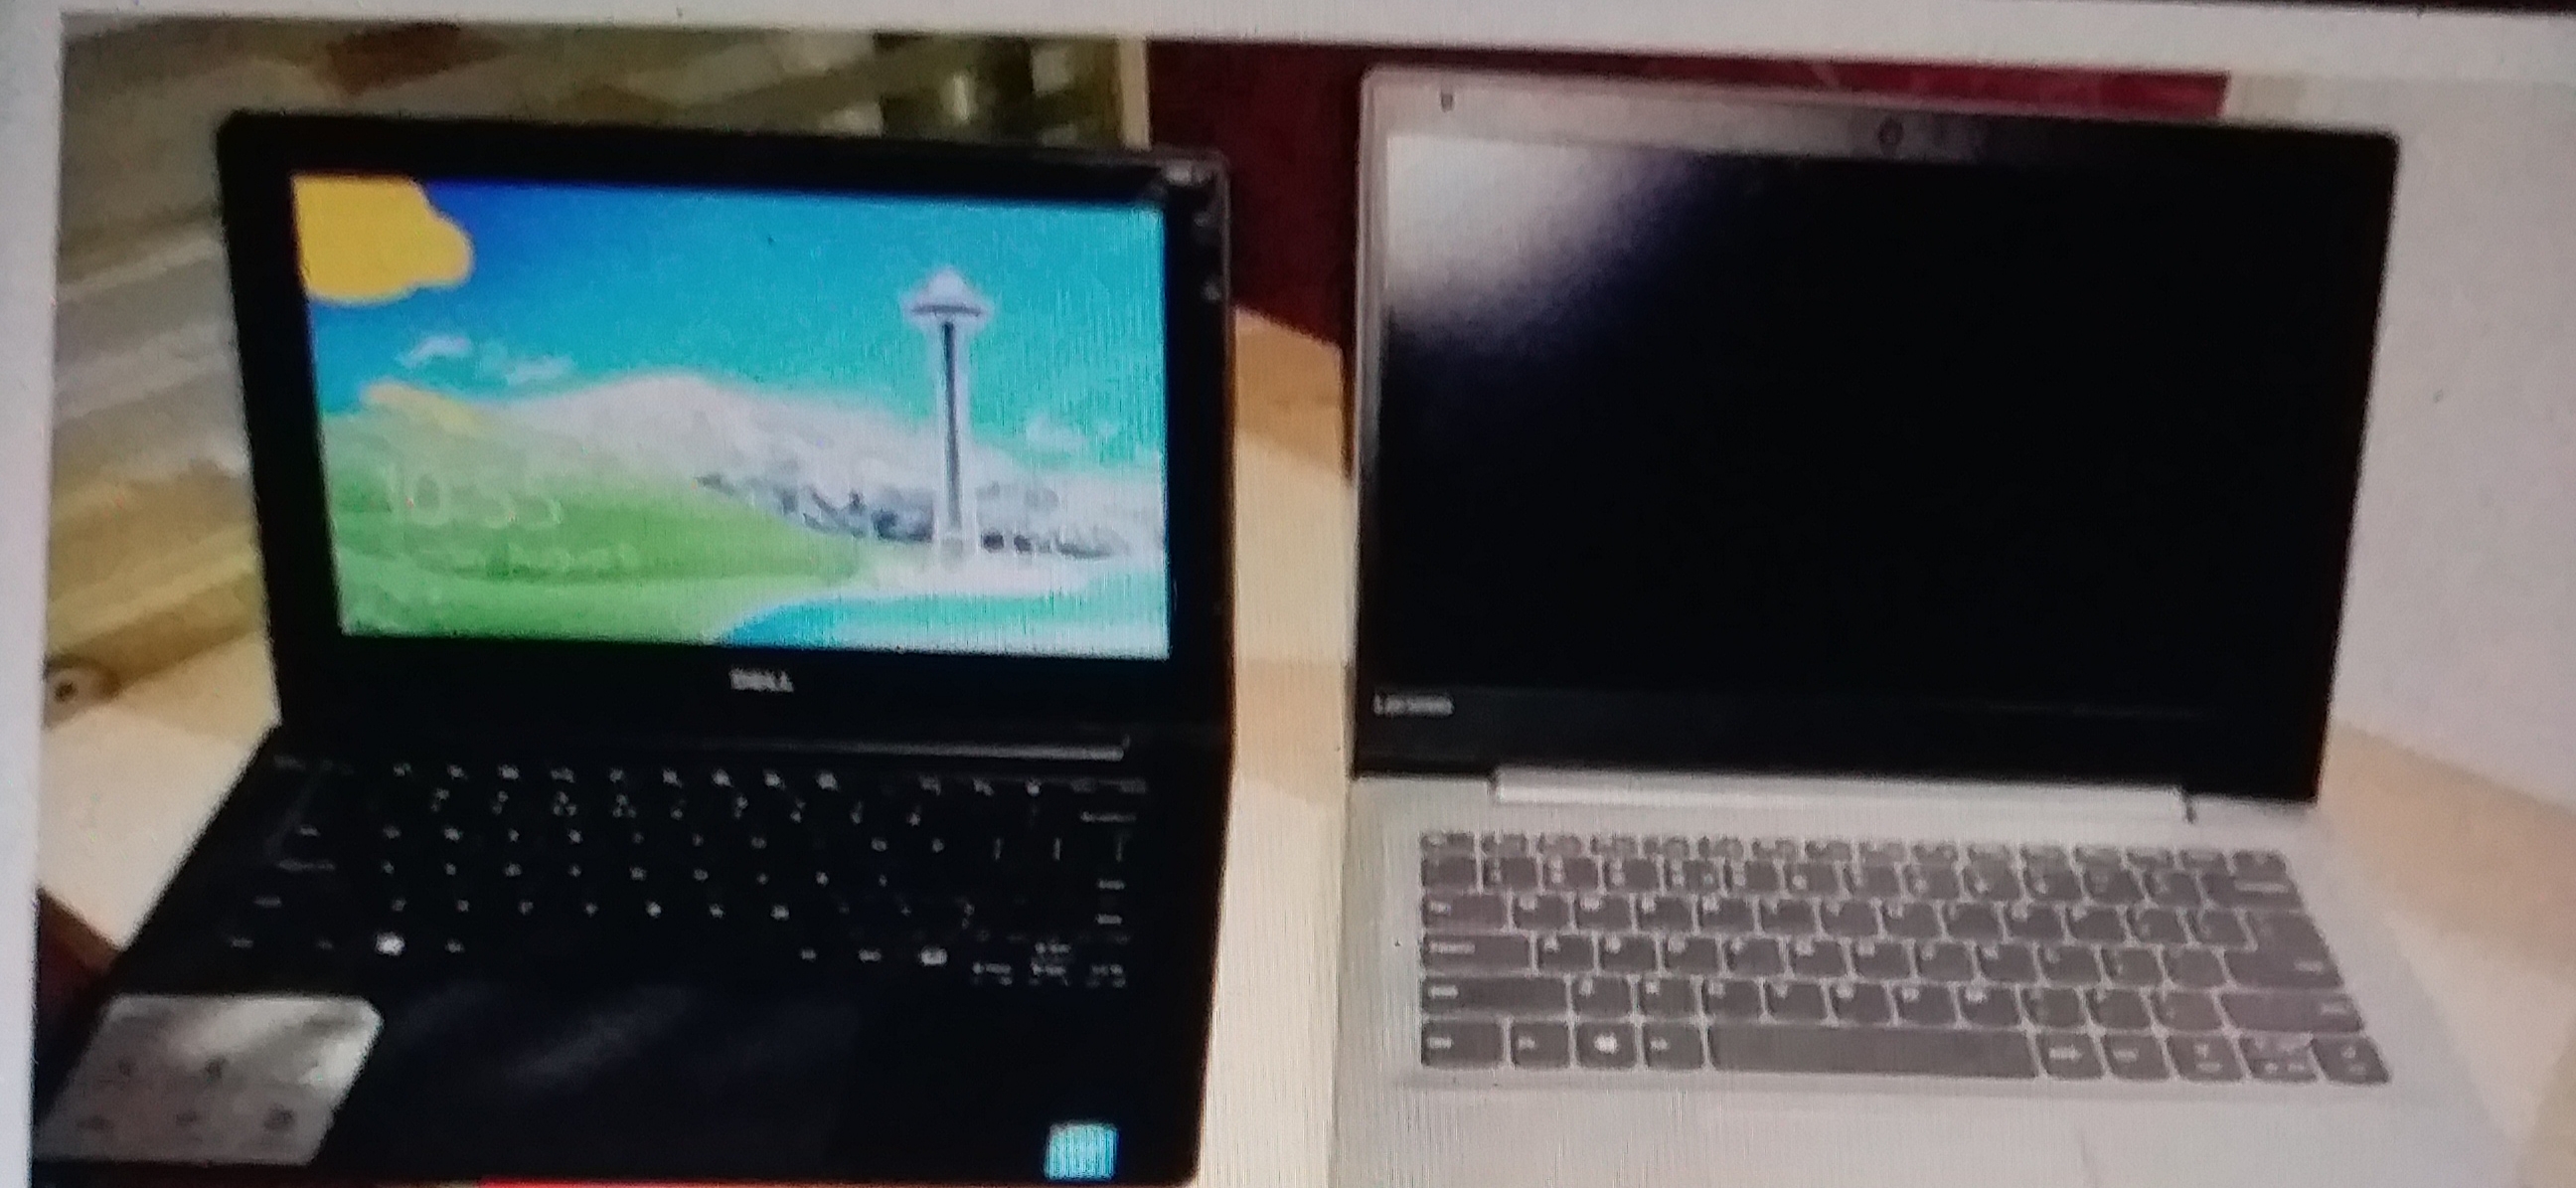 2 laptops rescued